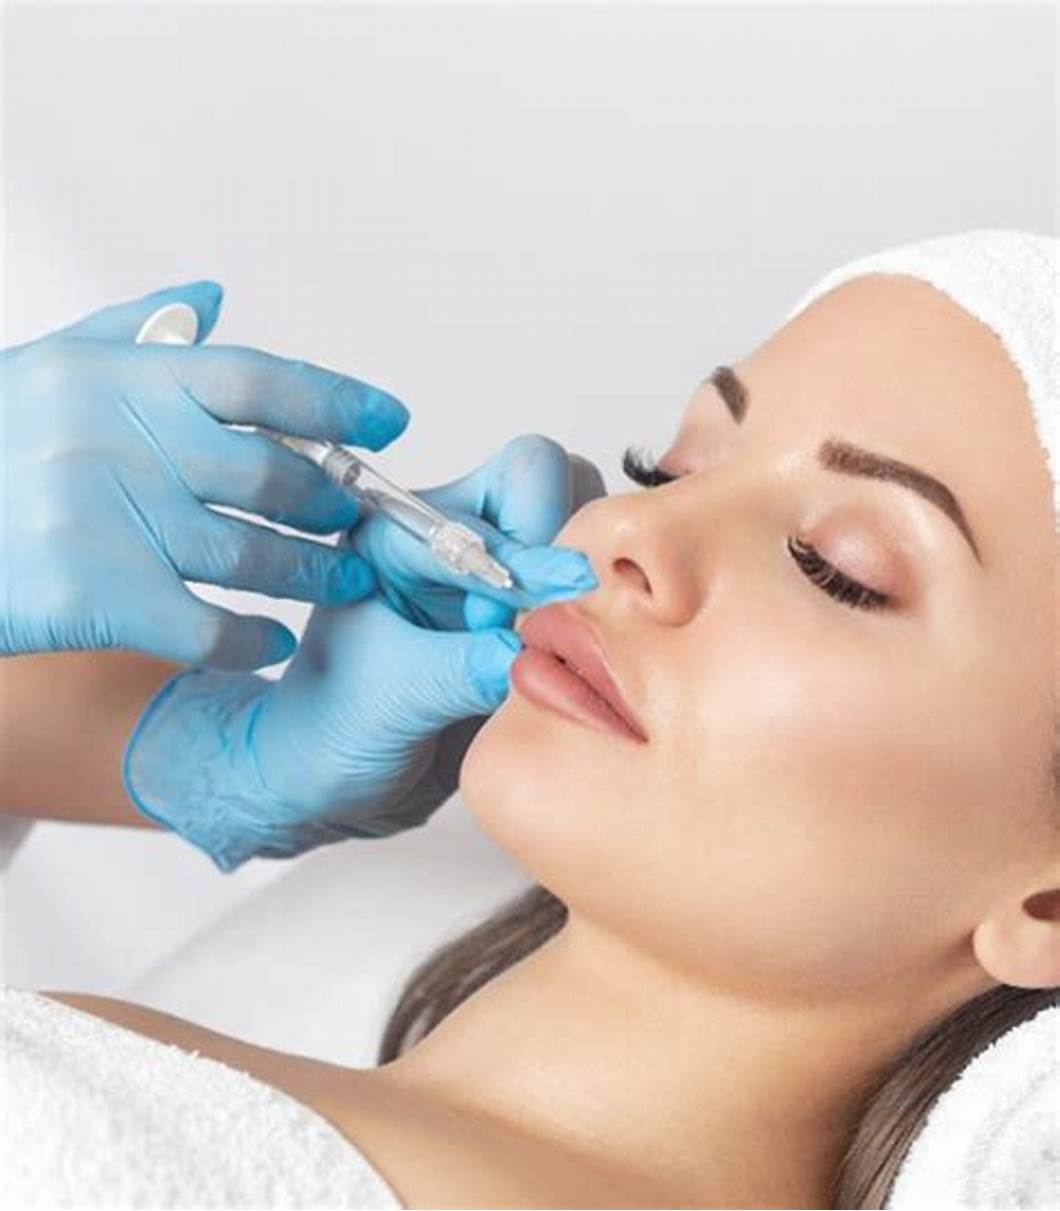 Achieve Your Aesthetic Goals: Transformations Aesthetics Med Spa Leads the Way